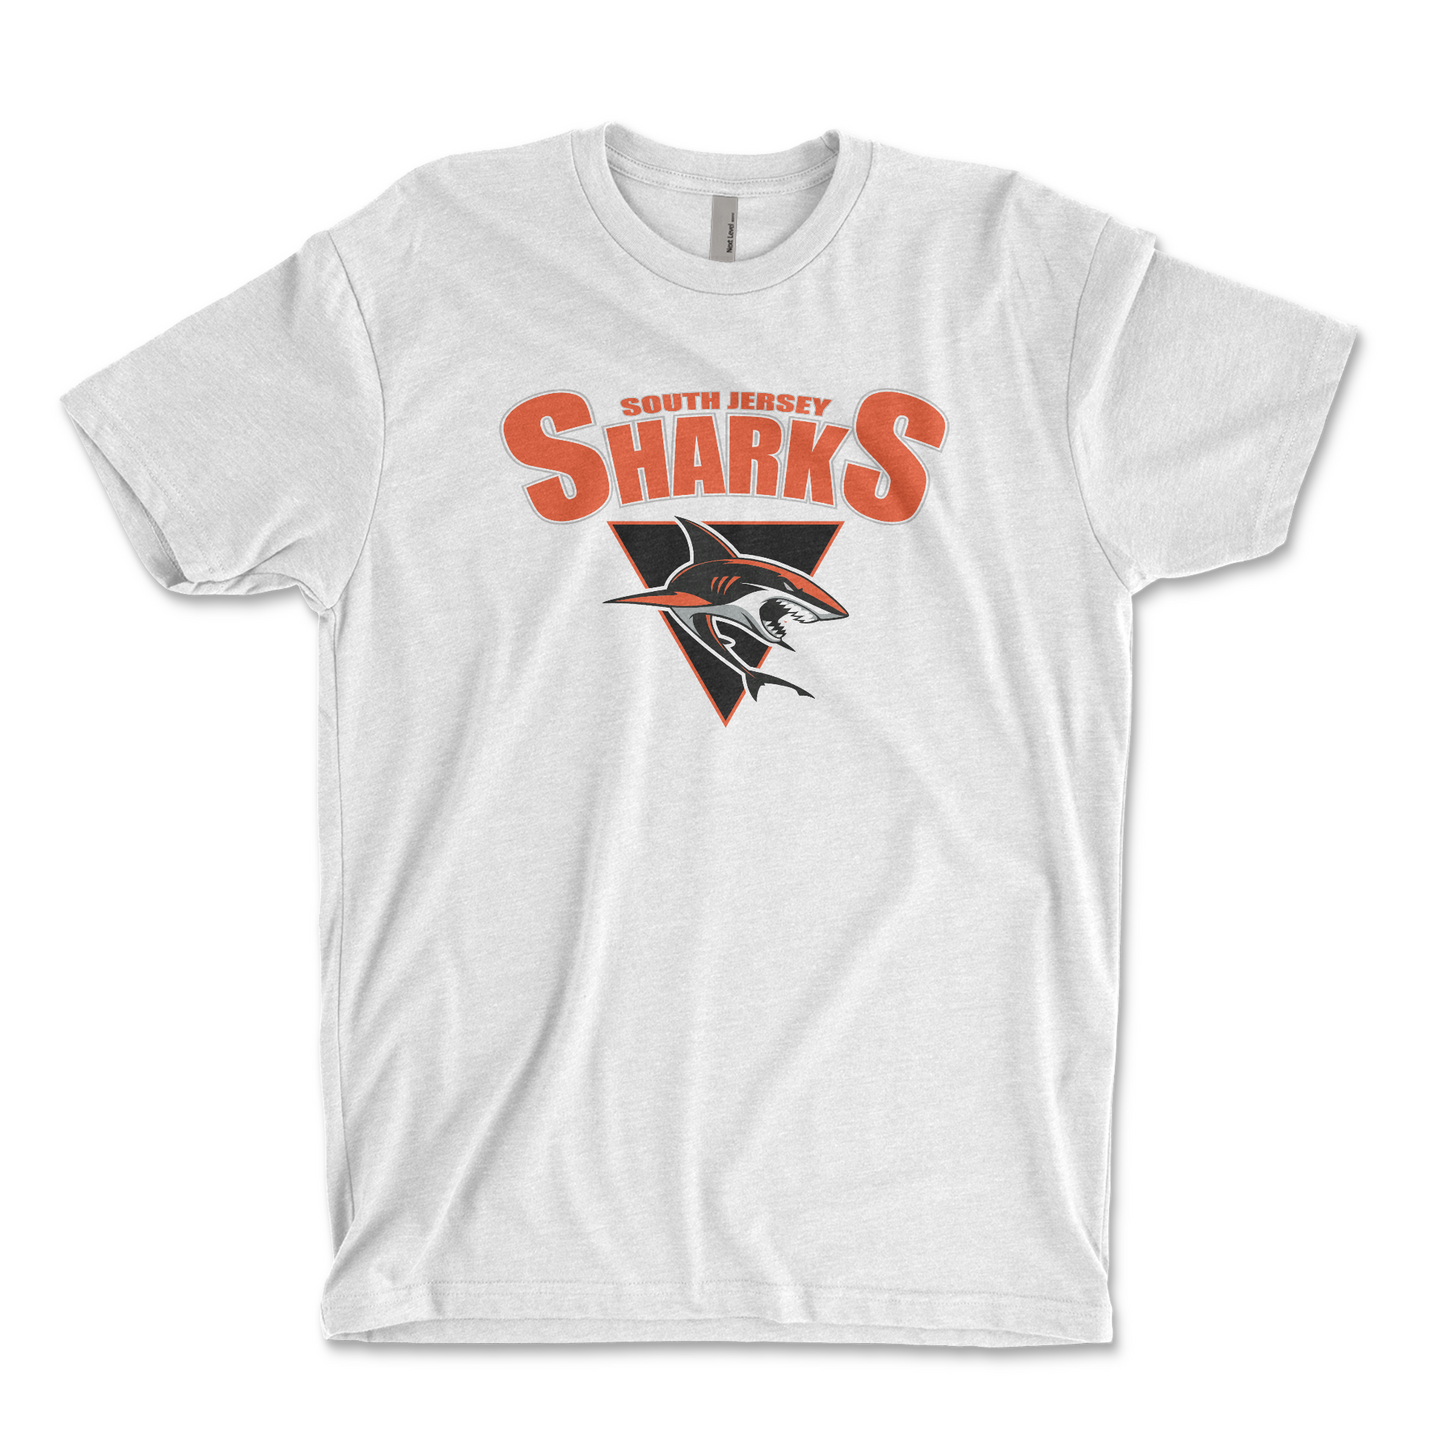 Retro 90's Series - South Jersey Sharks